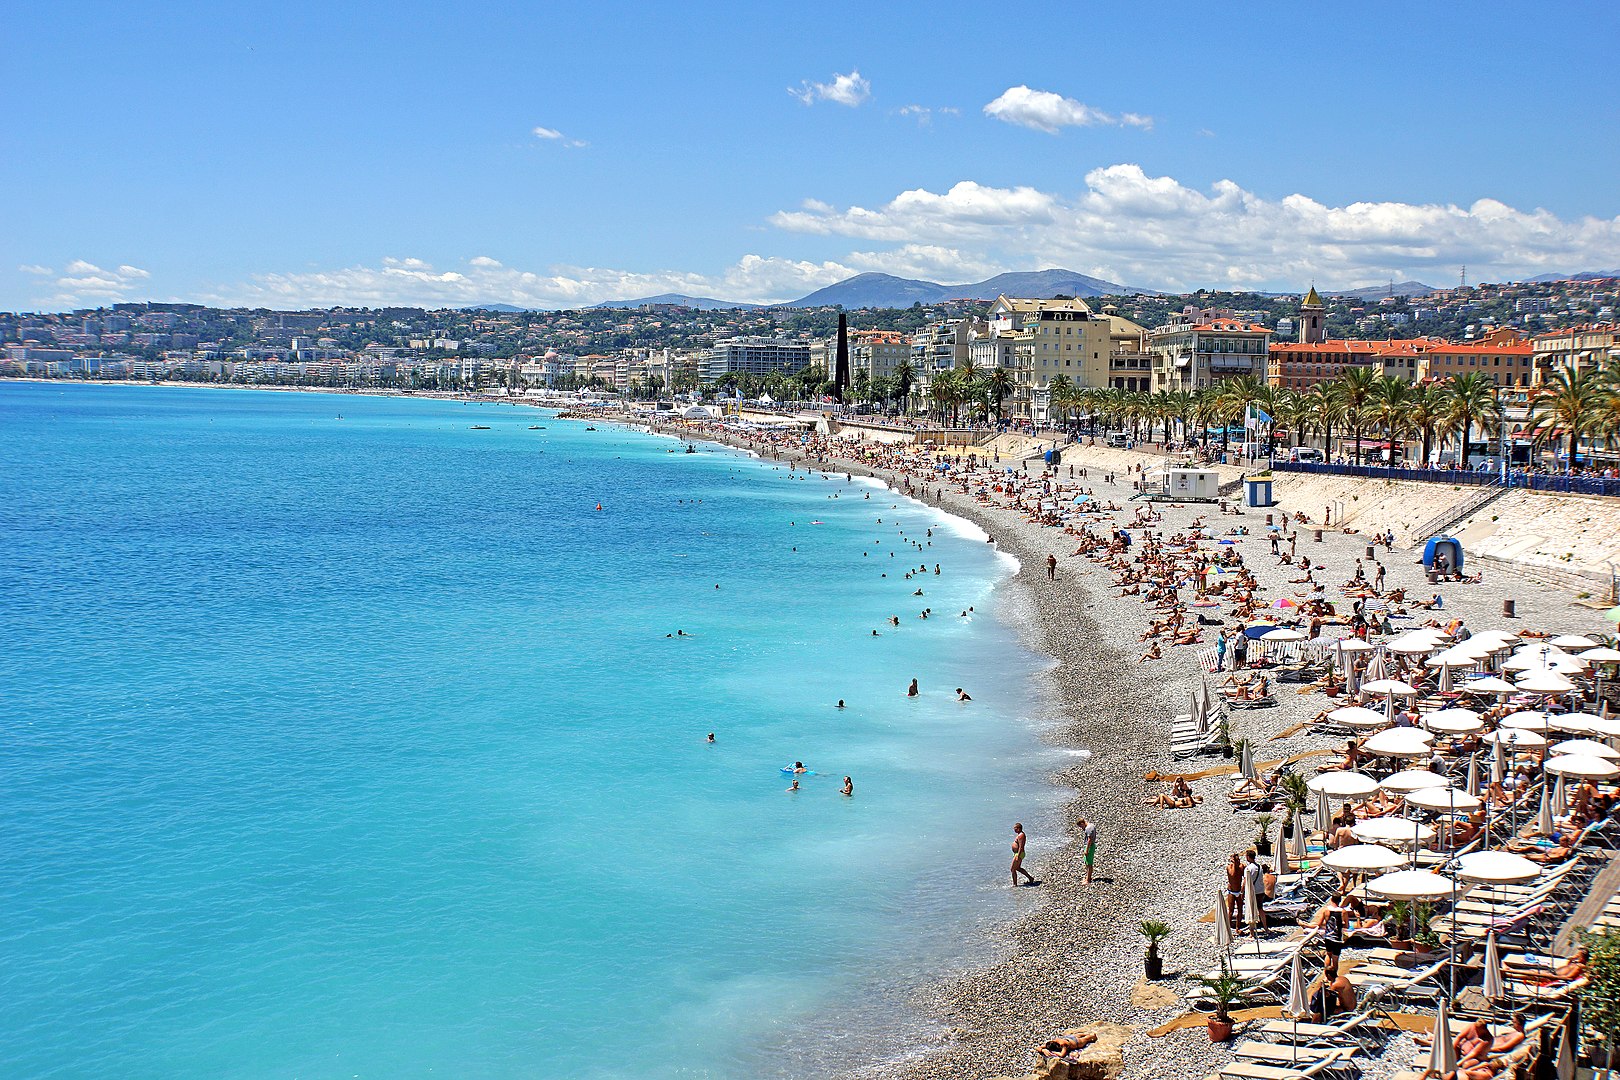 French Riviera - Beach in Nice © Dennis Jarvis - licence [CC BY-SA 2.0] from Wikimedia Commons